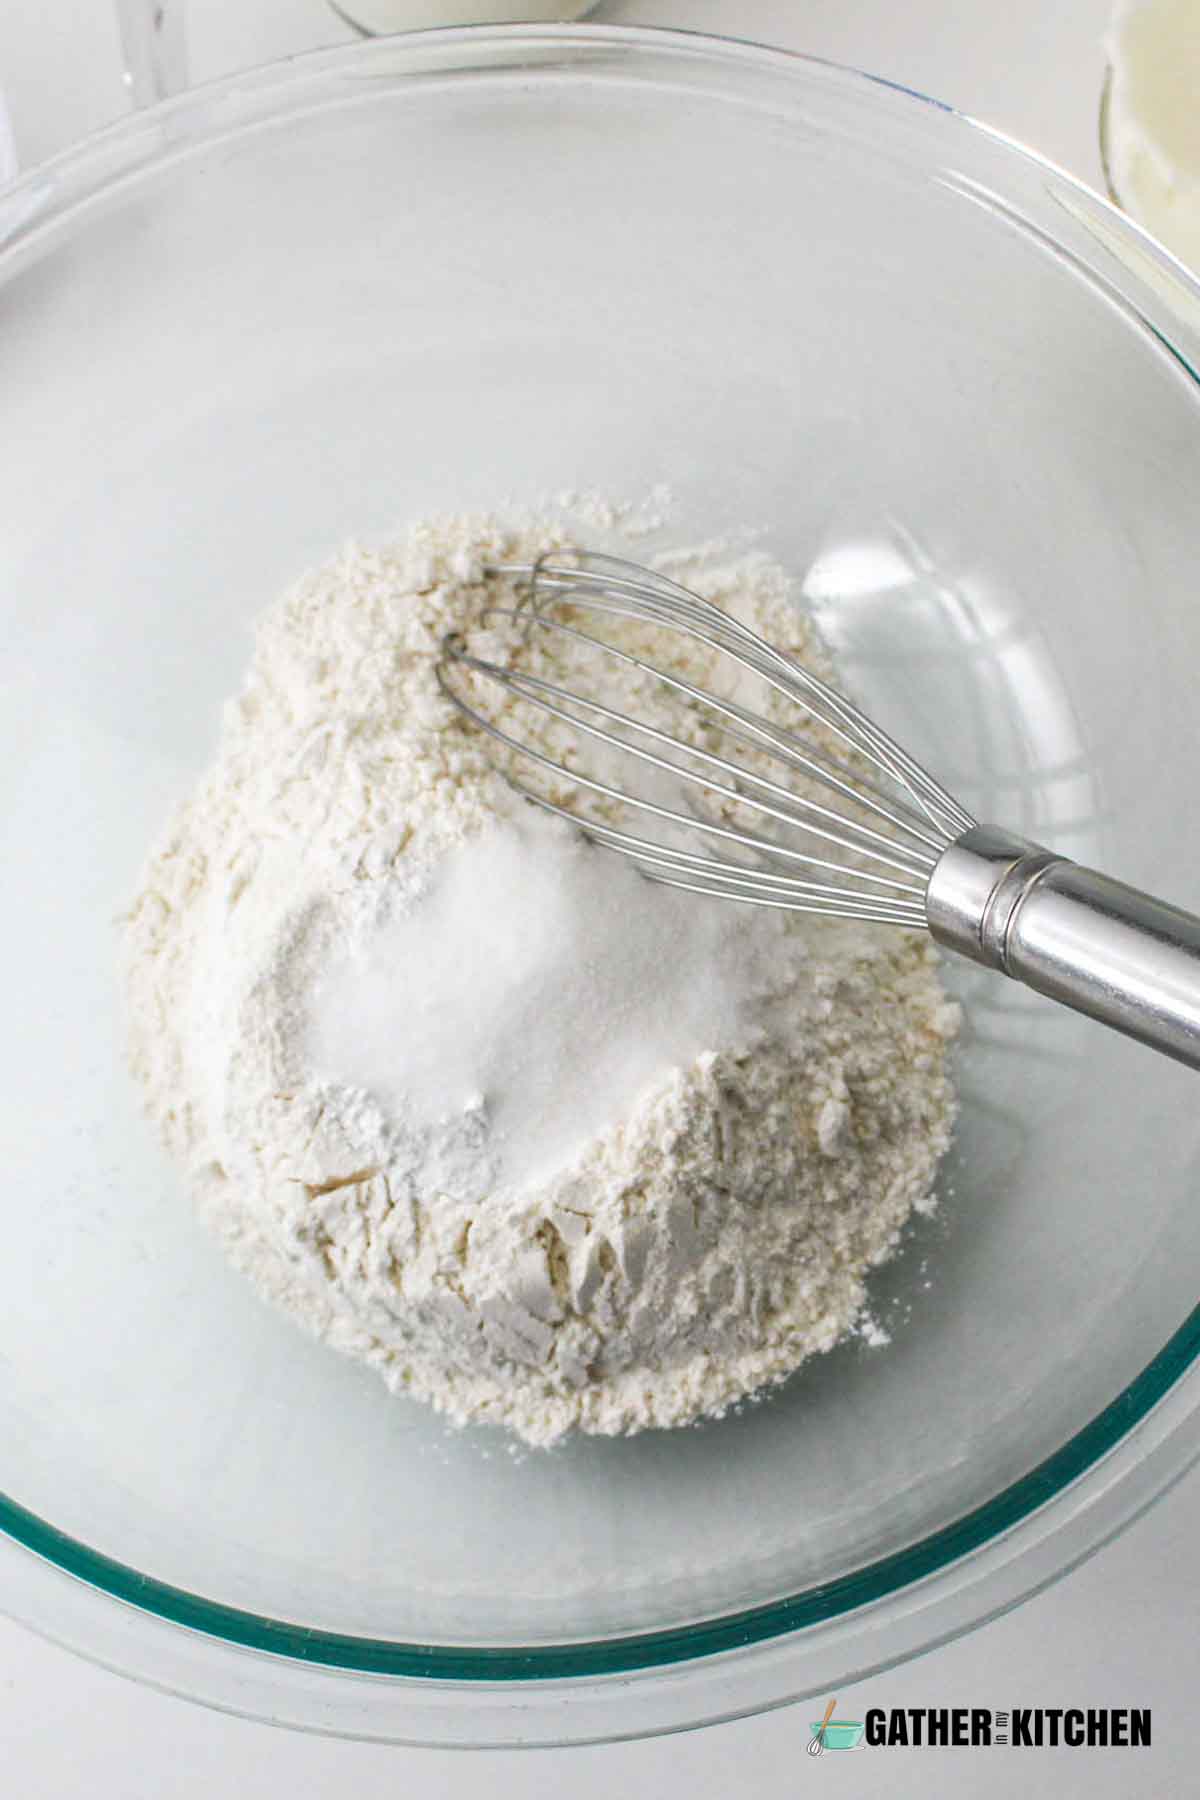 Dry ingredients in a bowl.